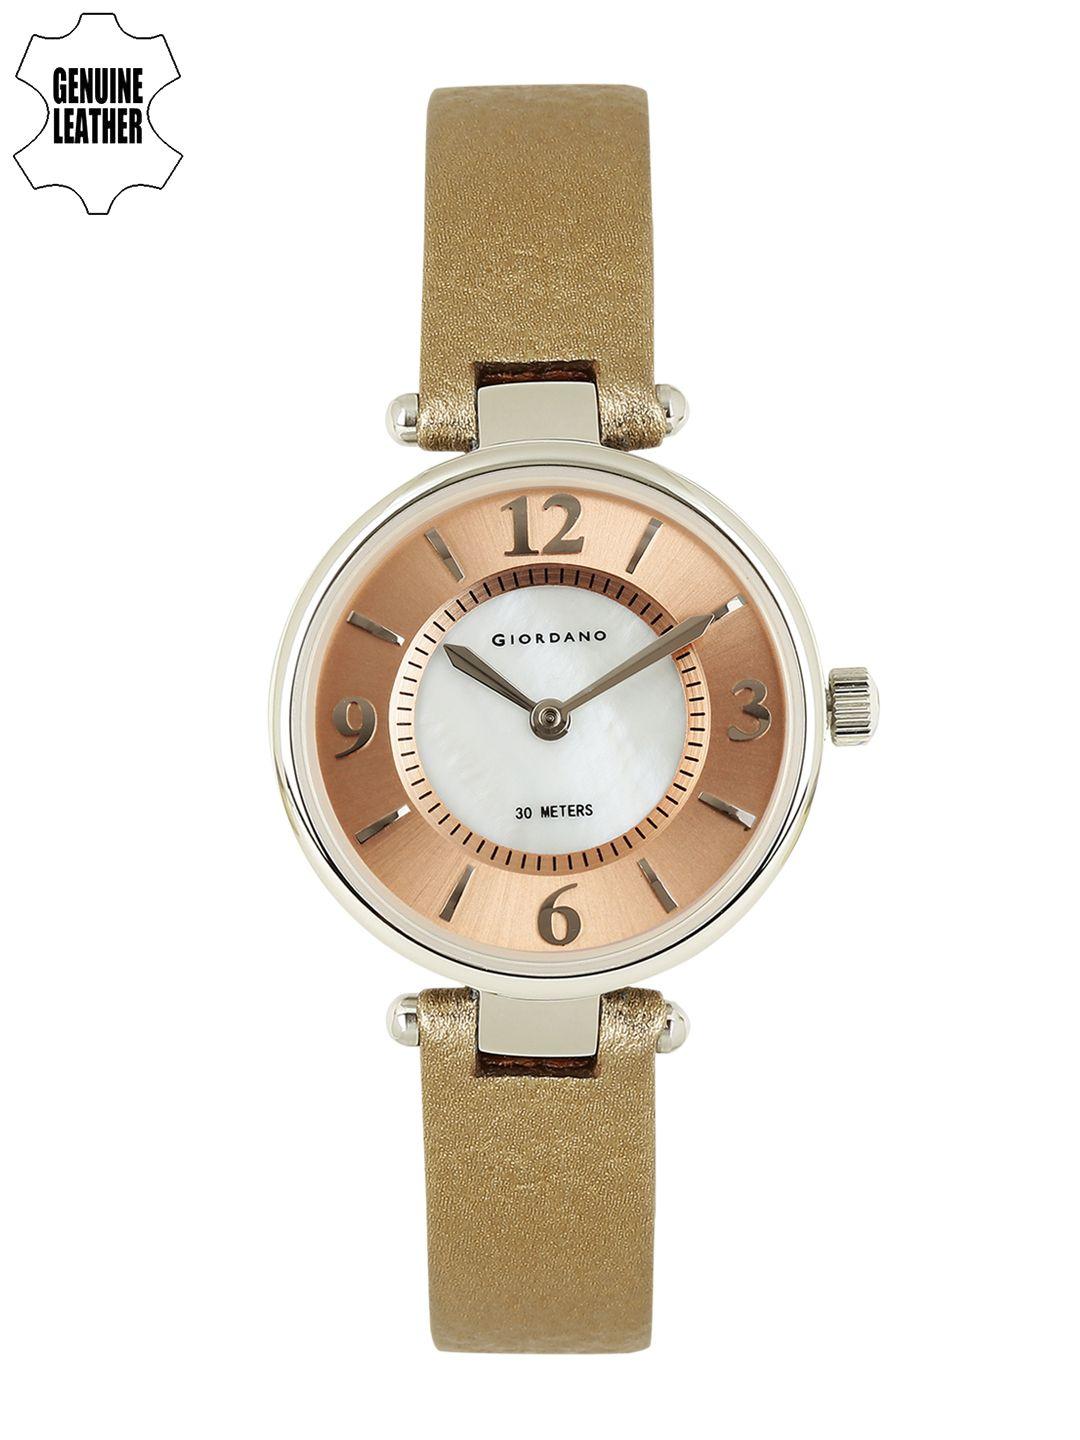 giordano women off-white & rose gold-toned analogue watch 2796